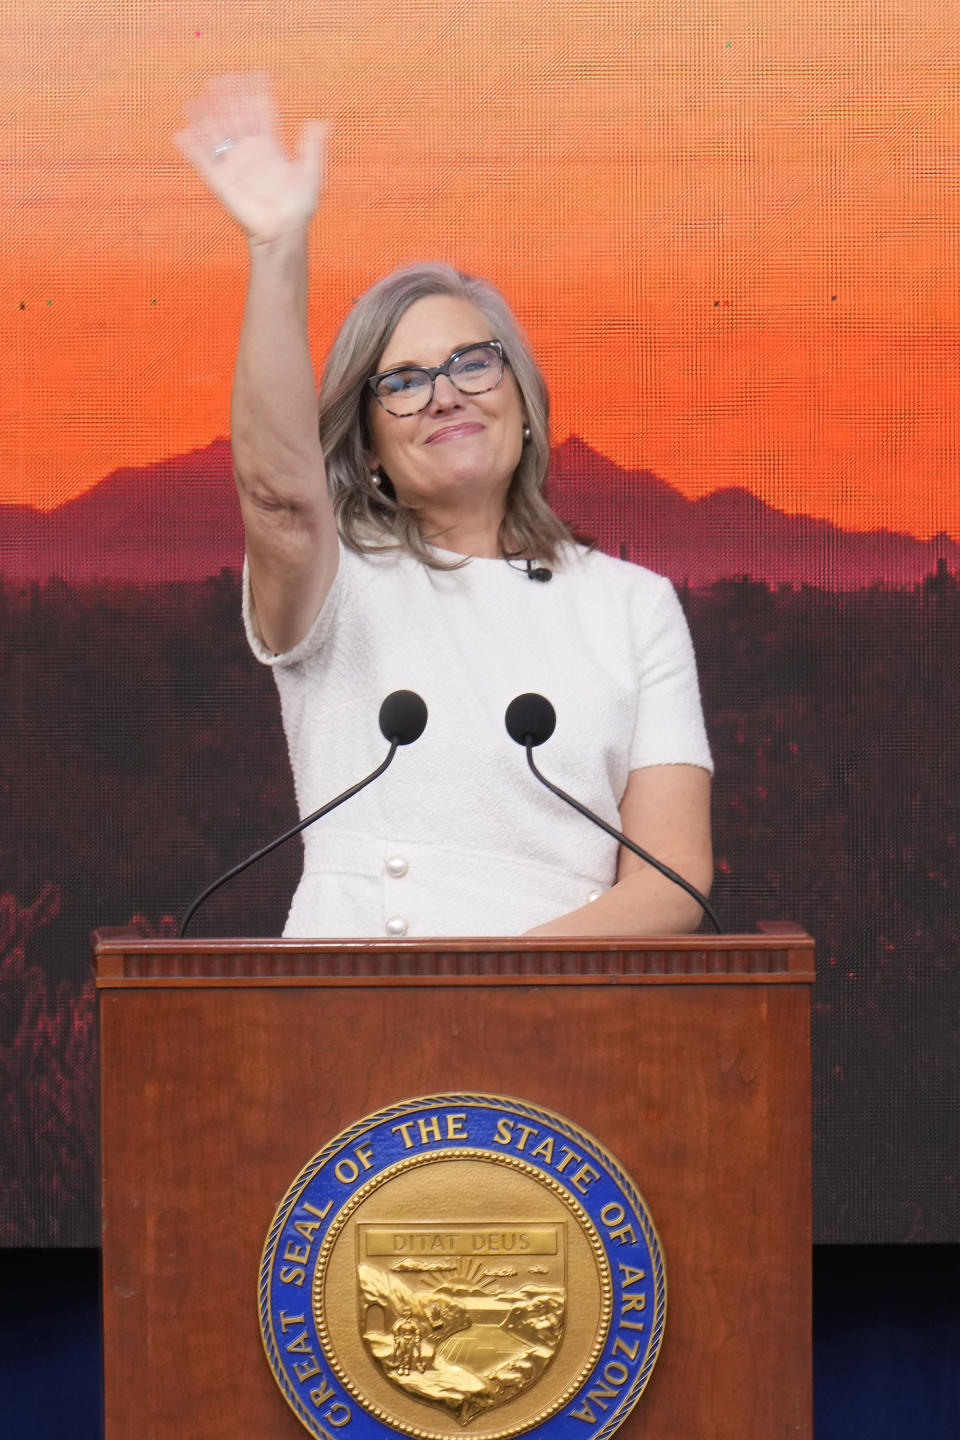 Arizona Democratic Gov. Katie Hobbs waves to a cheering crowd after taking a ceremonial oath of office during a public inauguration at the state Capitol in Phoenix, Thursday, Jan. 5, 2023. (AP Photo/Ross D. Franklin)